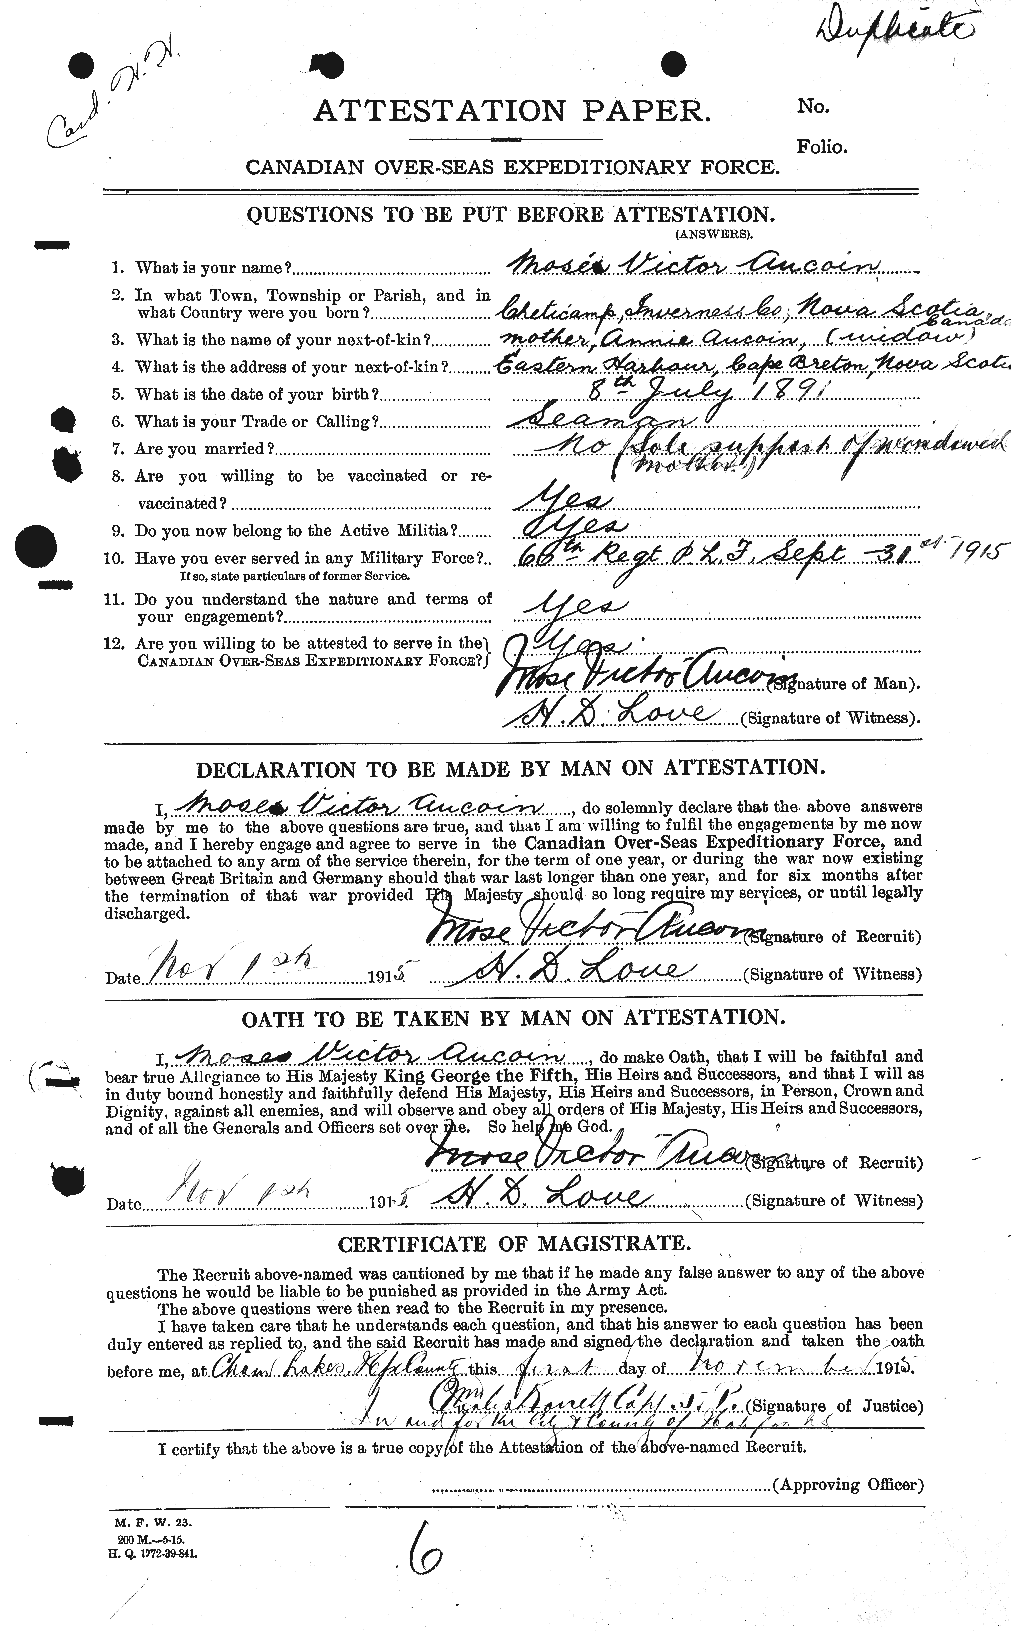 Personnel Records of the First World War - CEF 224542a